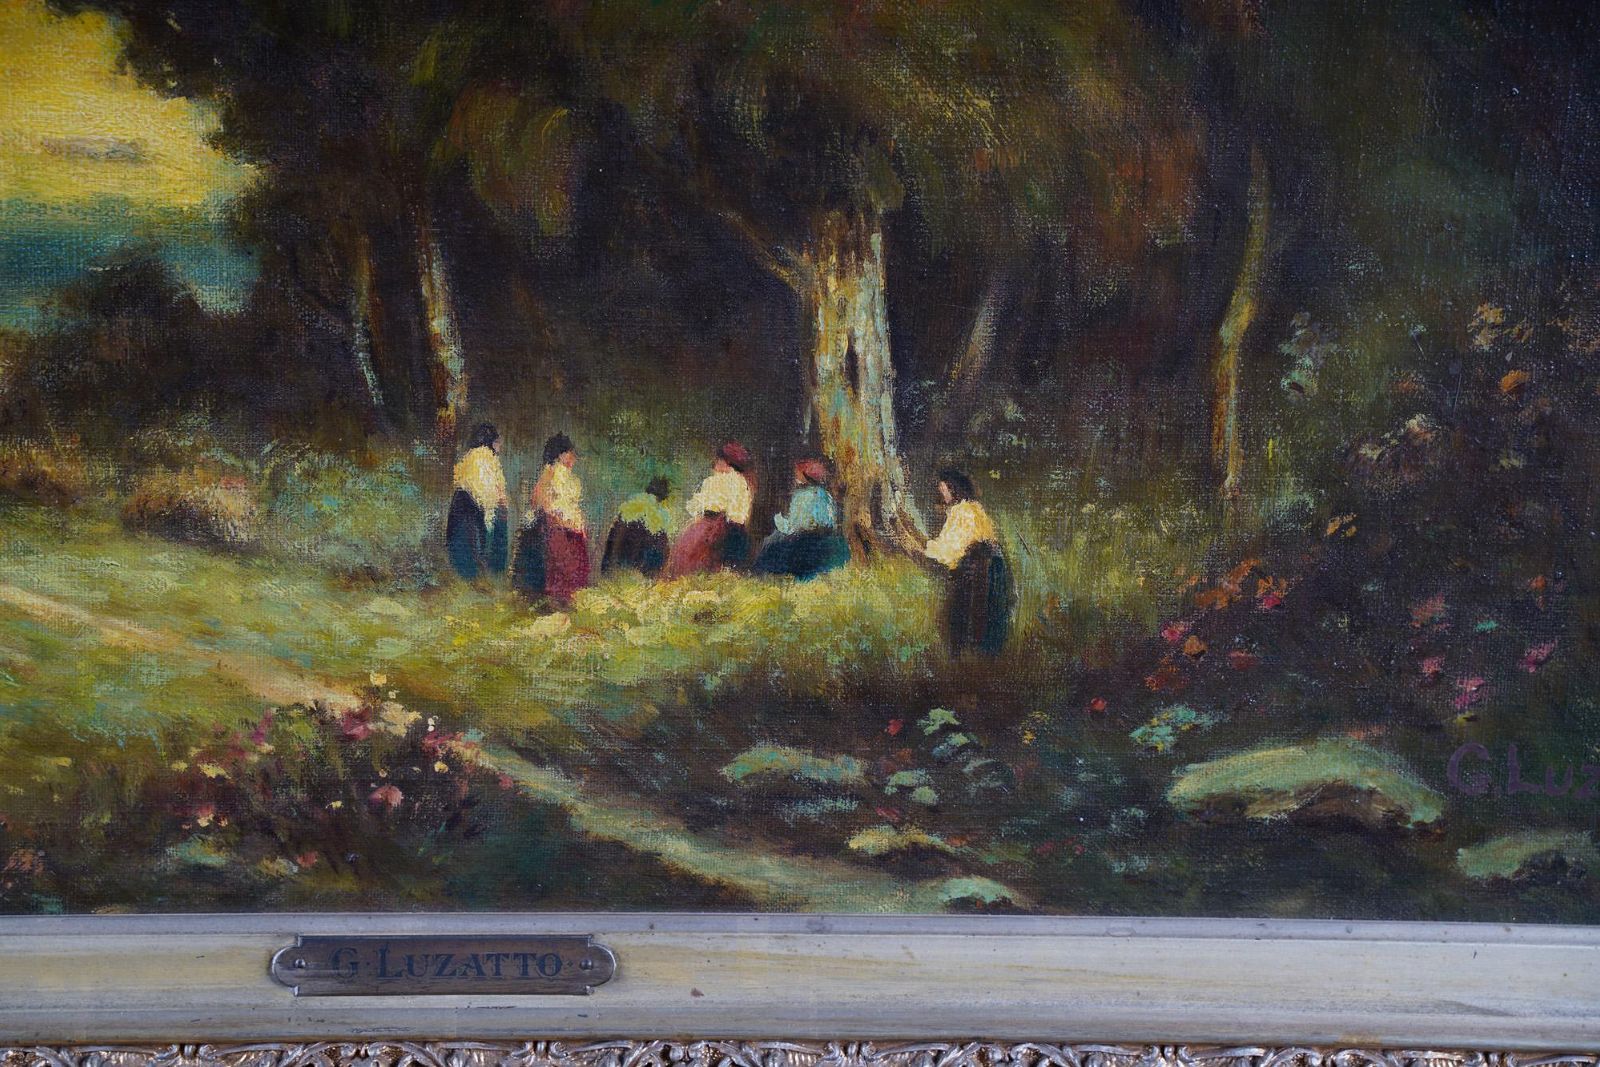 AW495: G. LUZATTO - LATE 19TH C ITALIAN LANDSCAPE WITH FIGURES - OIL ON CANVAS